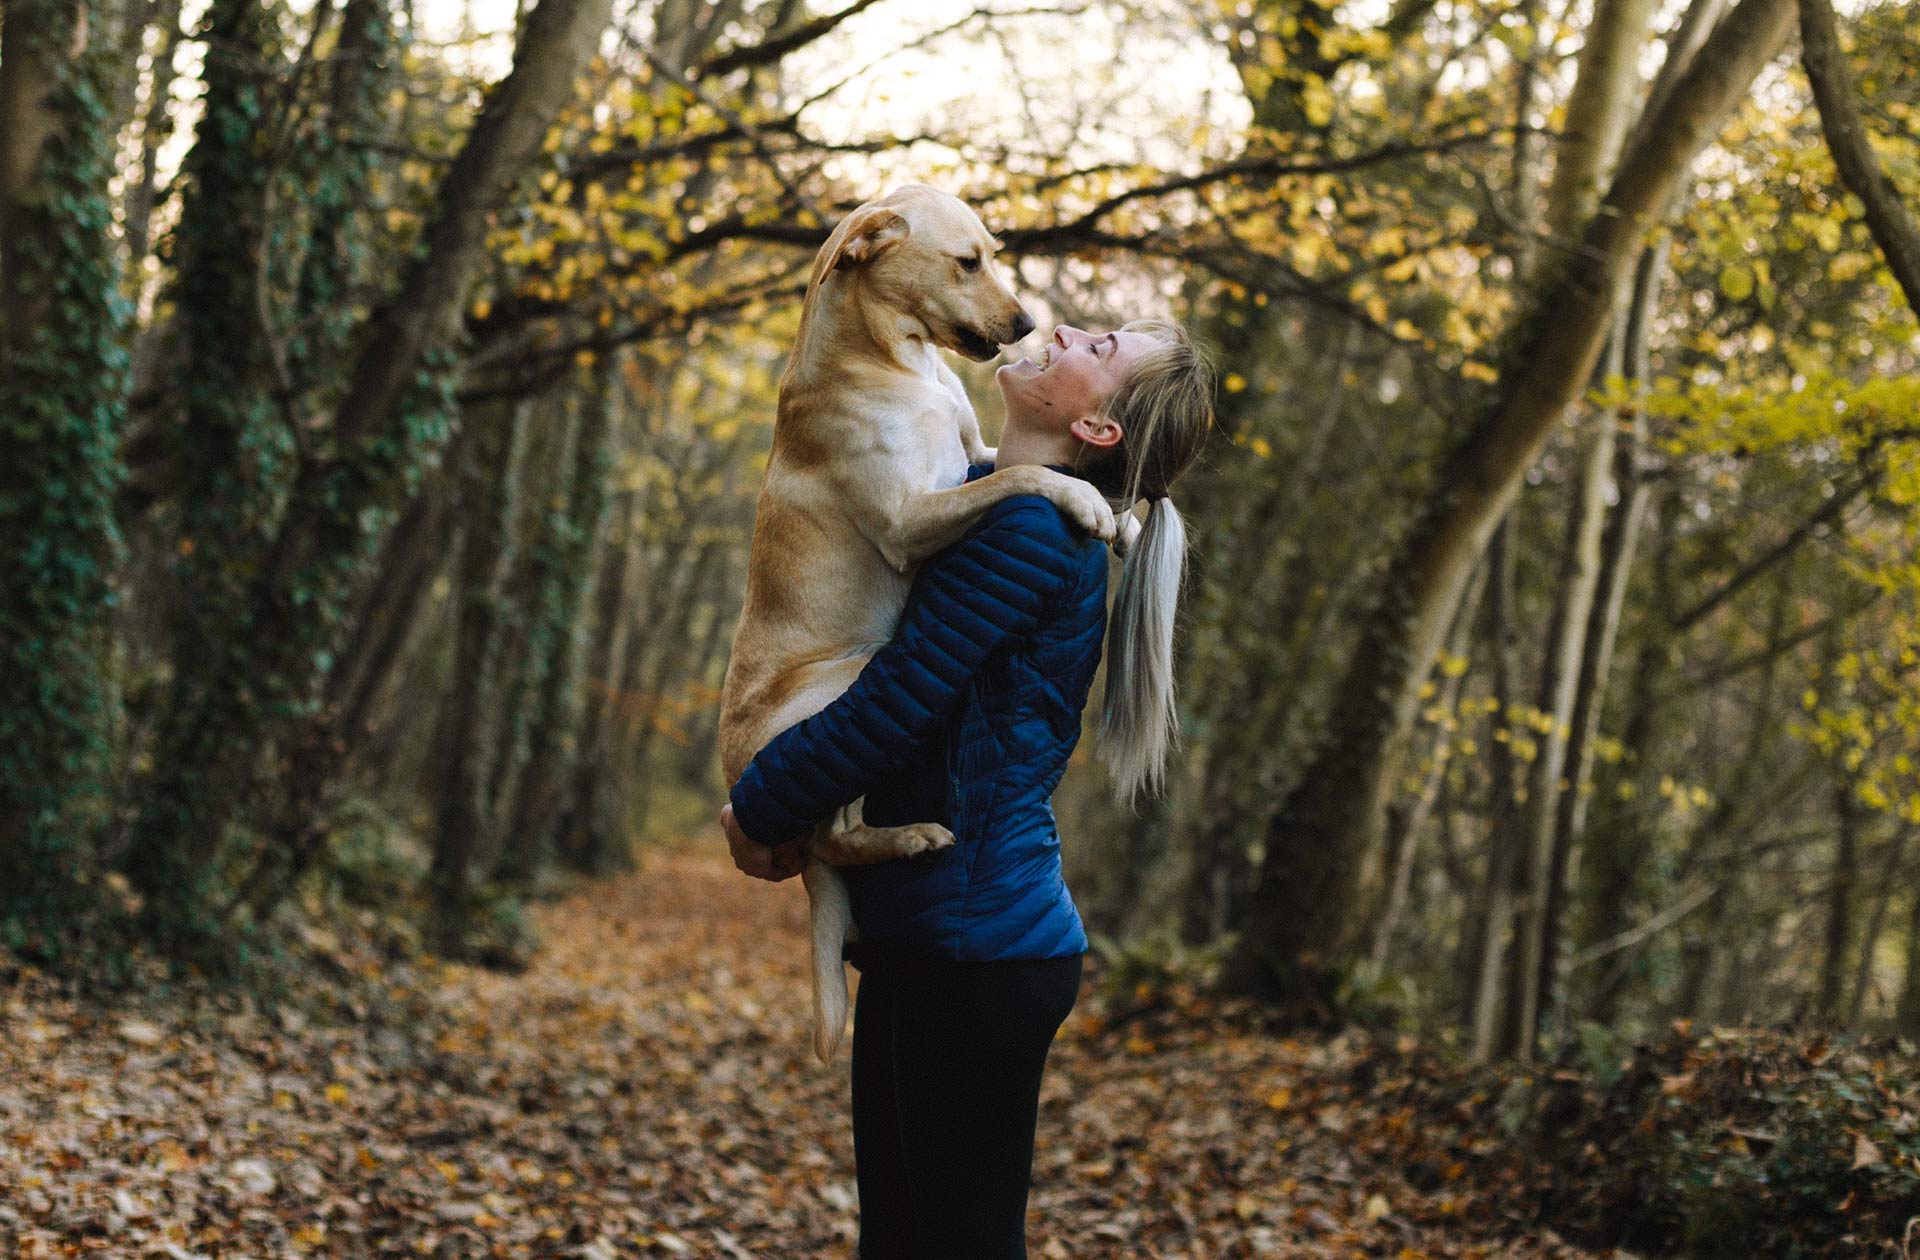 A woman with long hair is standing in the woods with a big dog in her arms. They are looking happily at each other.